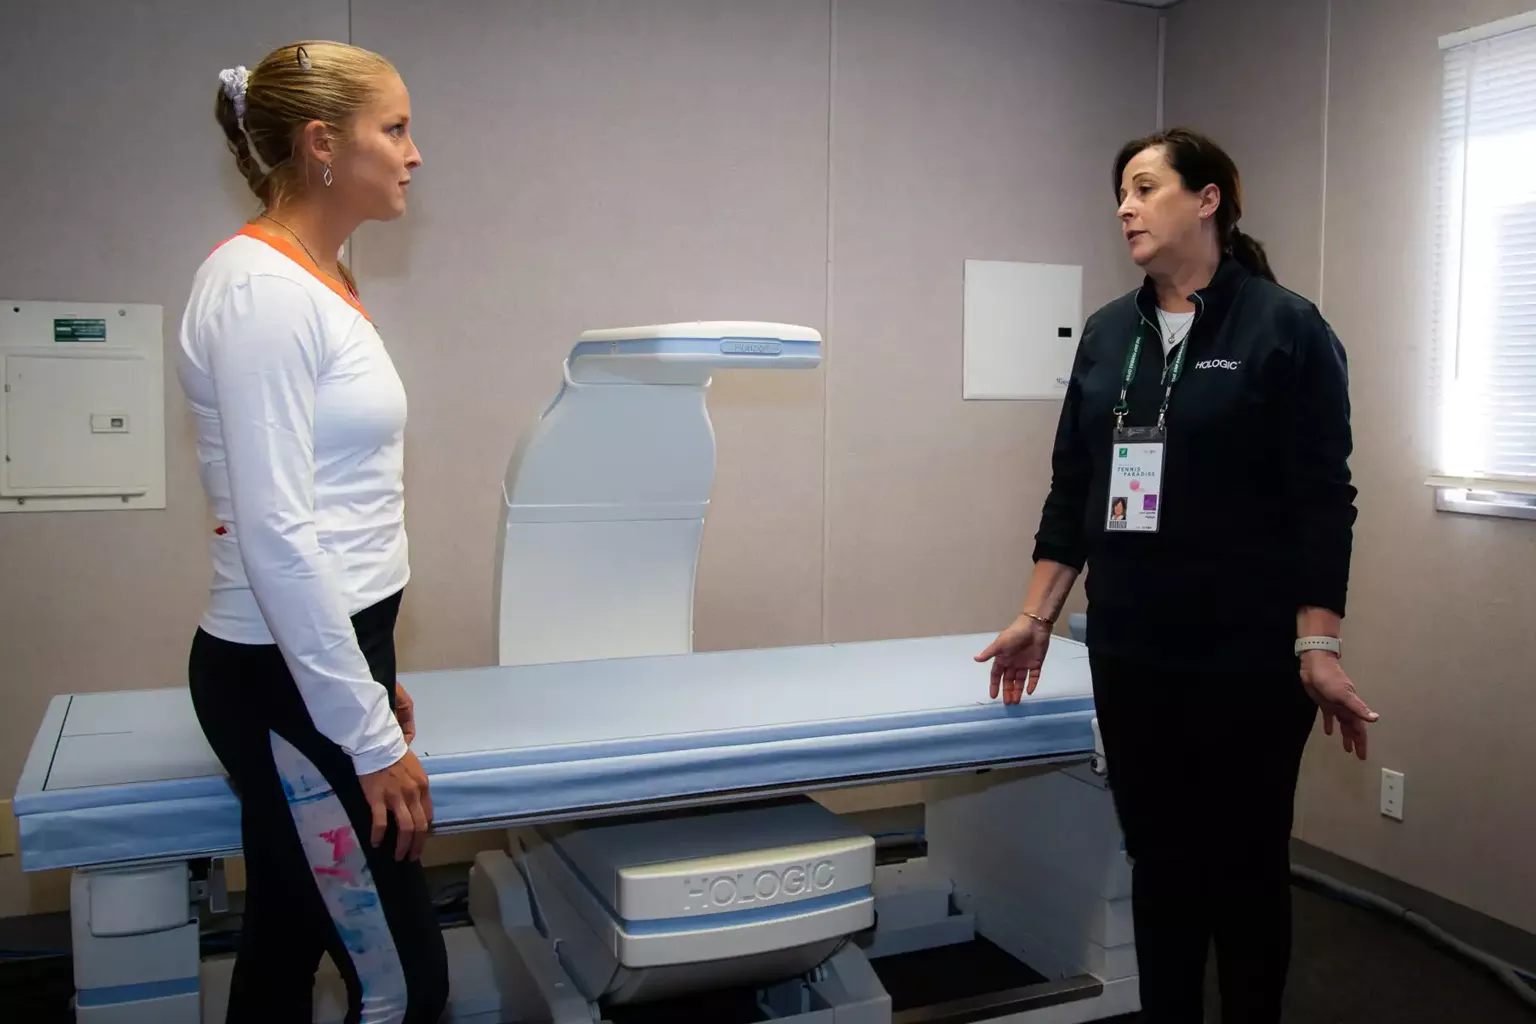 WTA tennis pro Shelby Rogers talks with Hologic’s Joan Spoden about the Horizon DXA body composition system in an exam room.